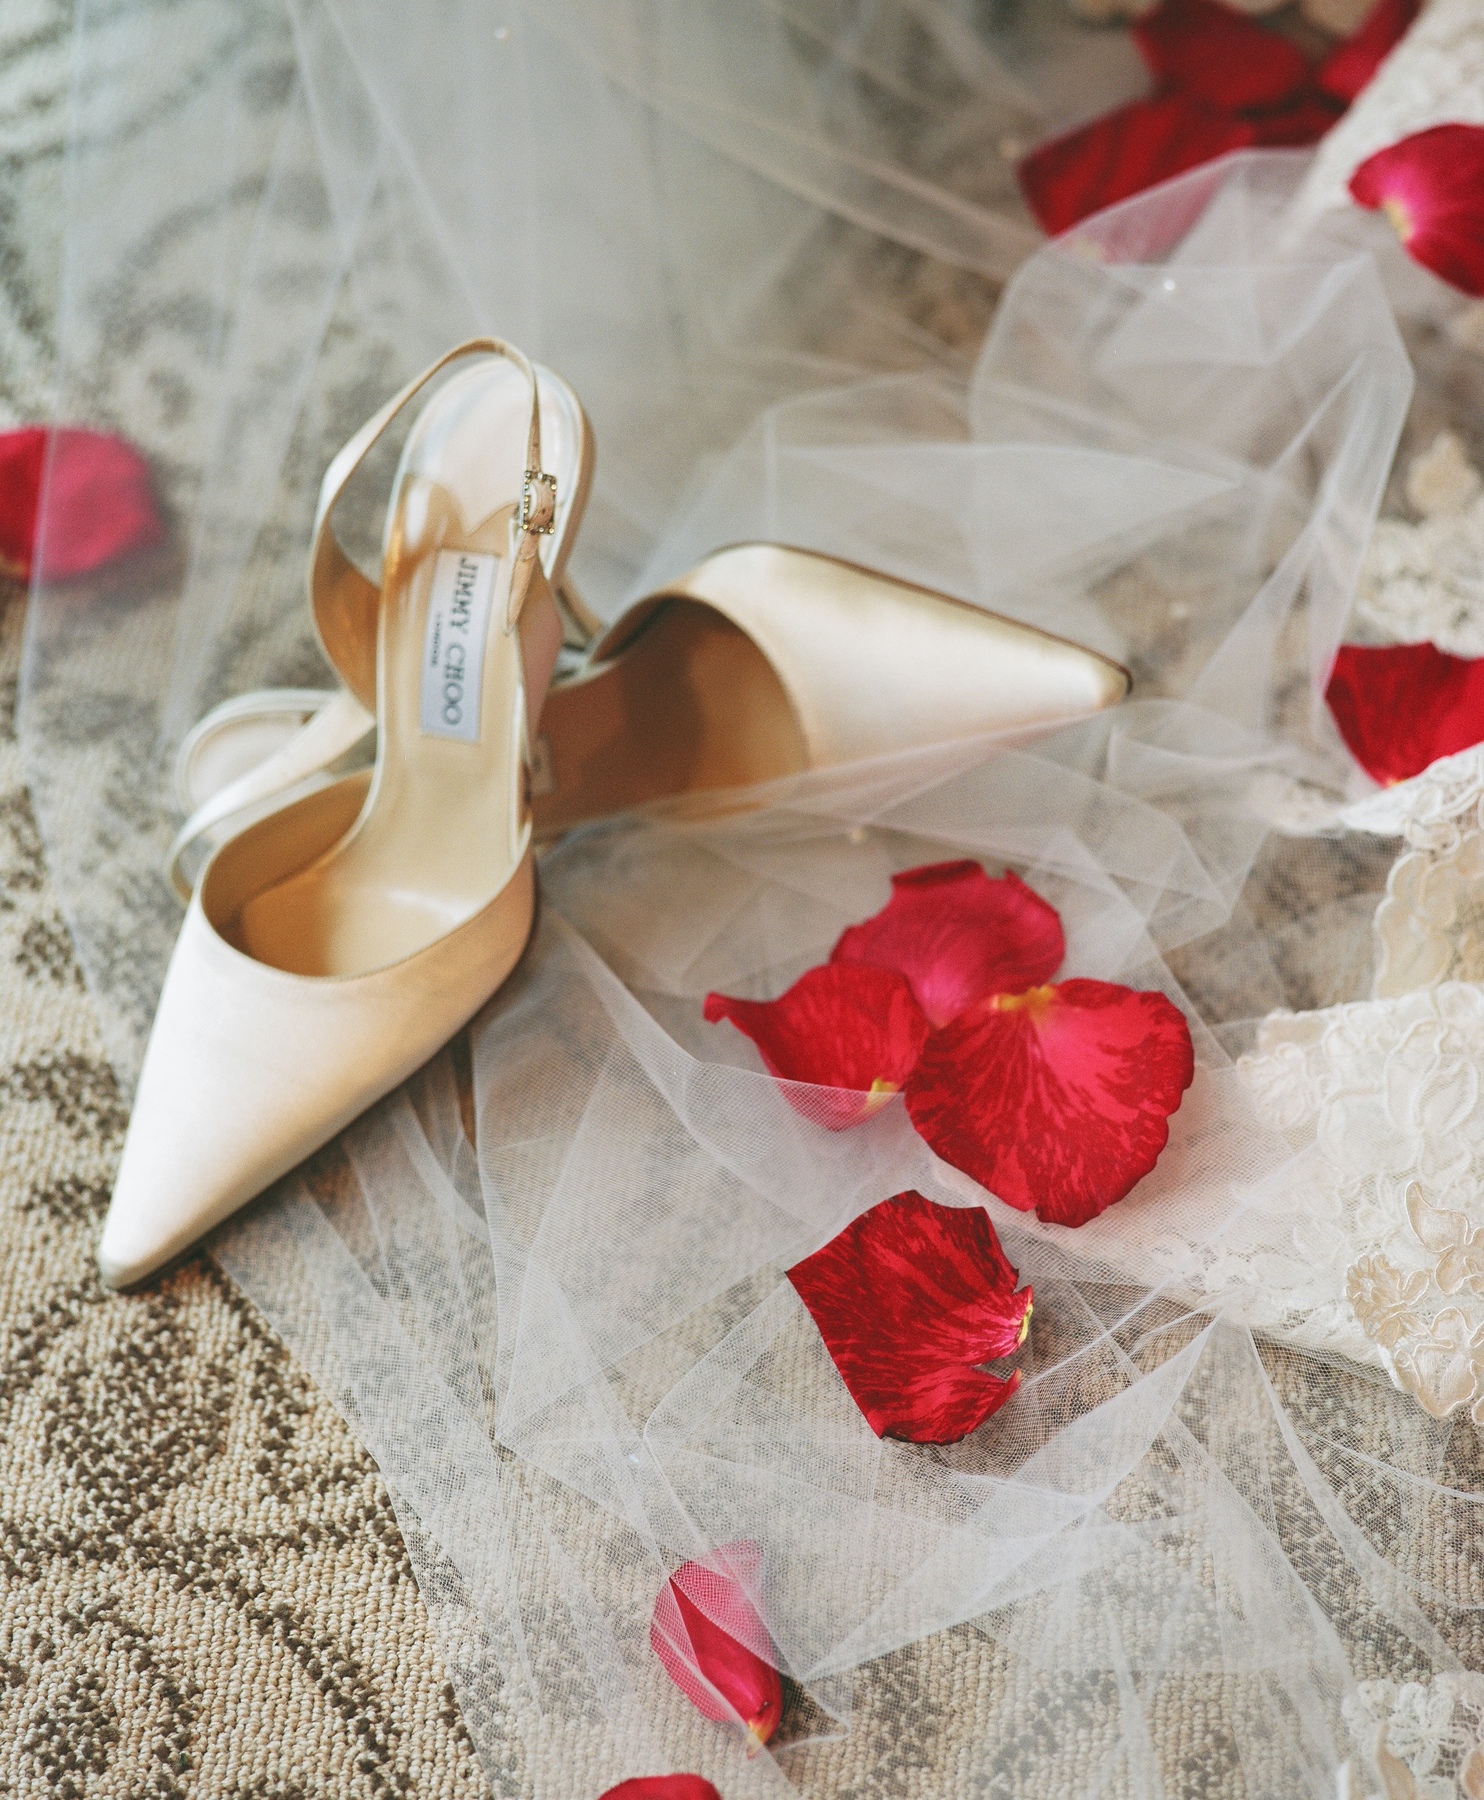 Wedding Shoes - Shopping Tips for Wedding Shoes